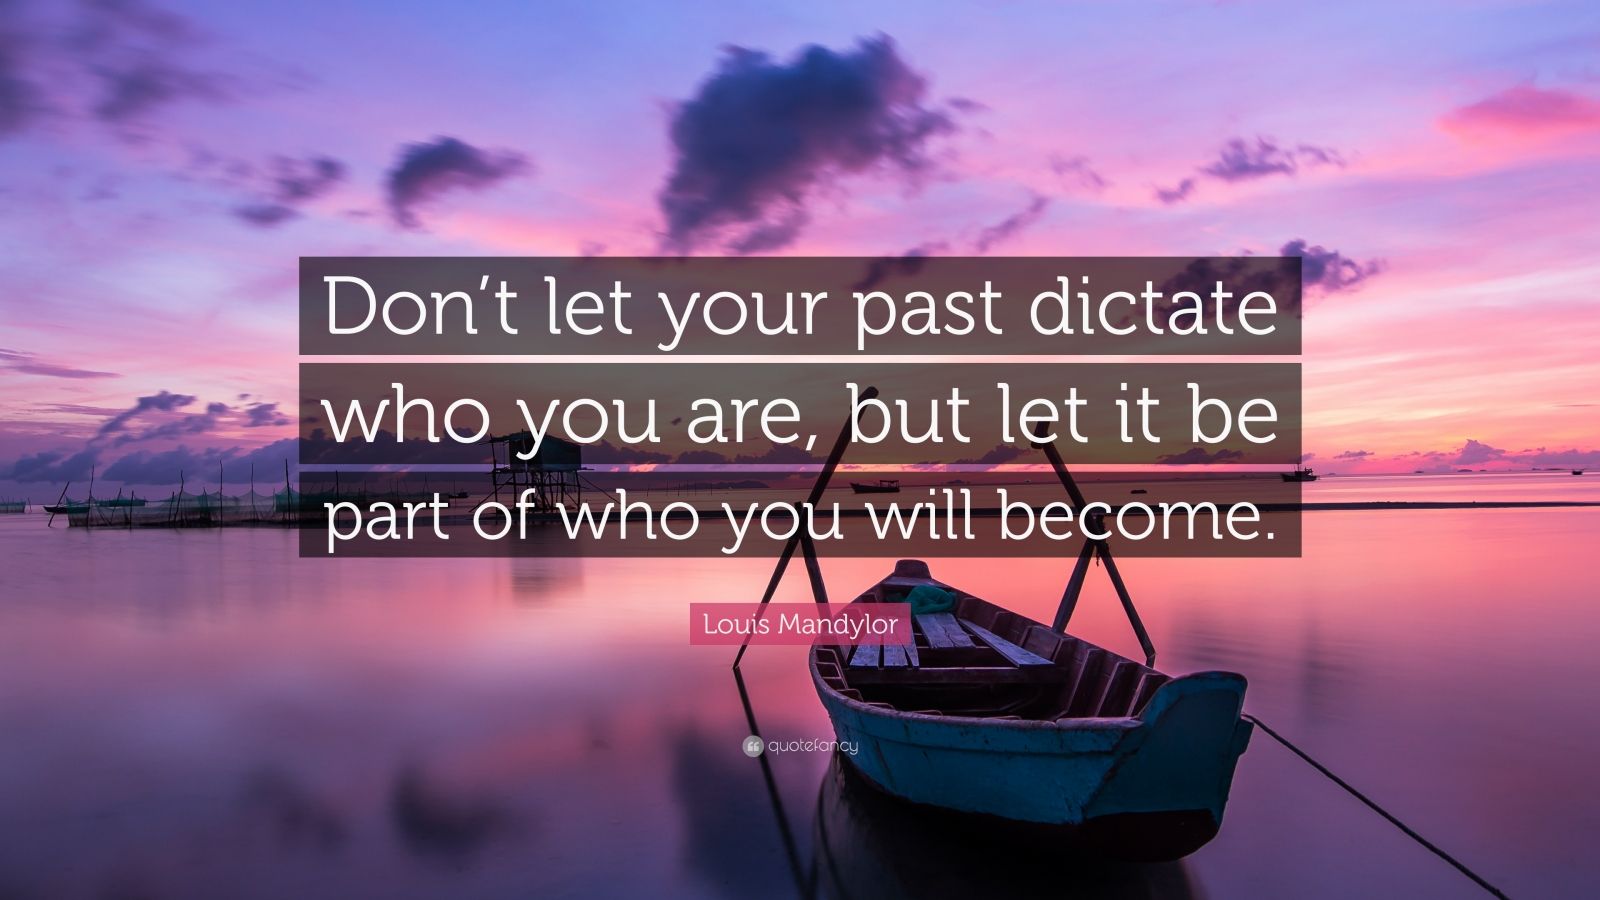 Louis Mandylor Quote: “Don’t let your past dictate who you are, but let